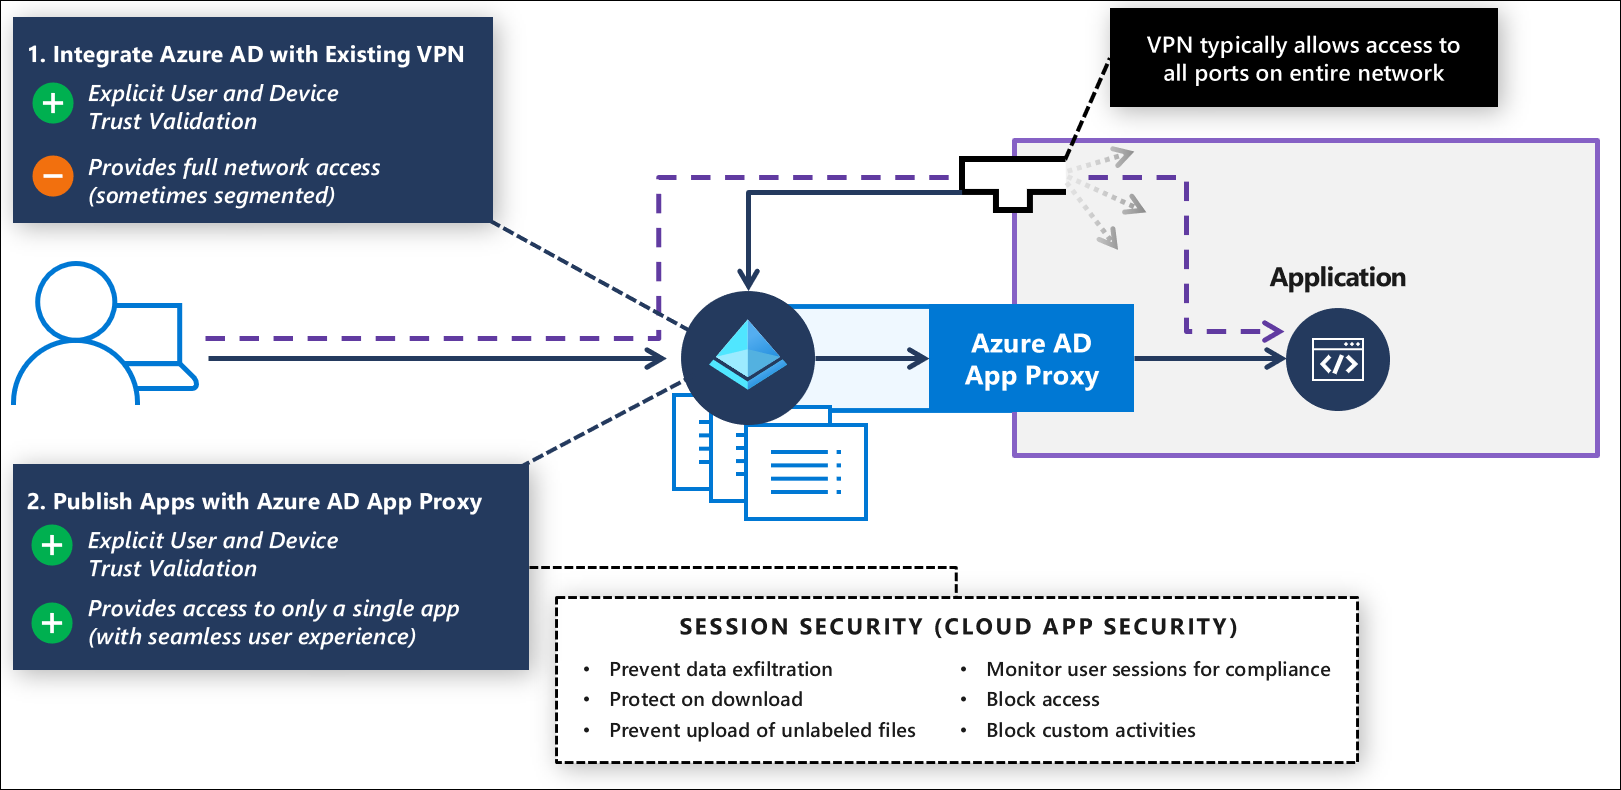 Modernize VPN authentication and move apps to modern access